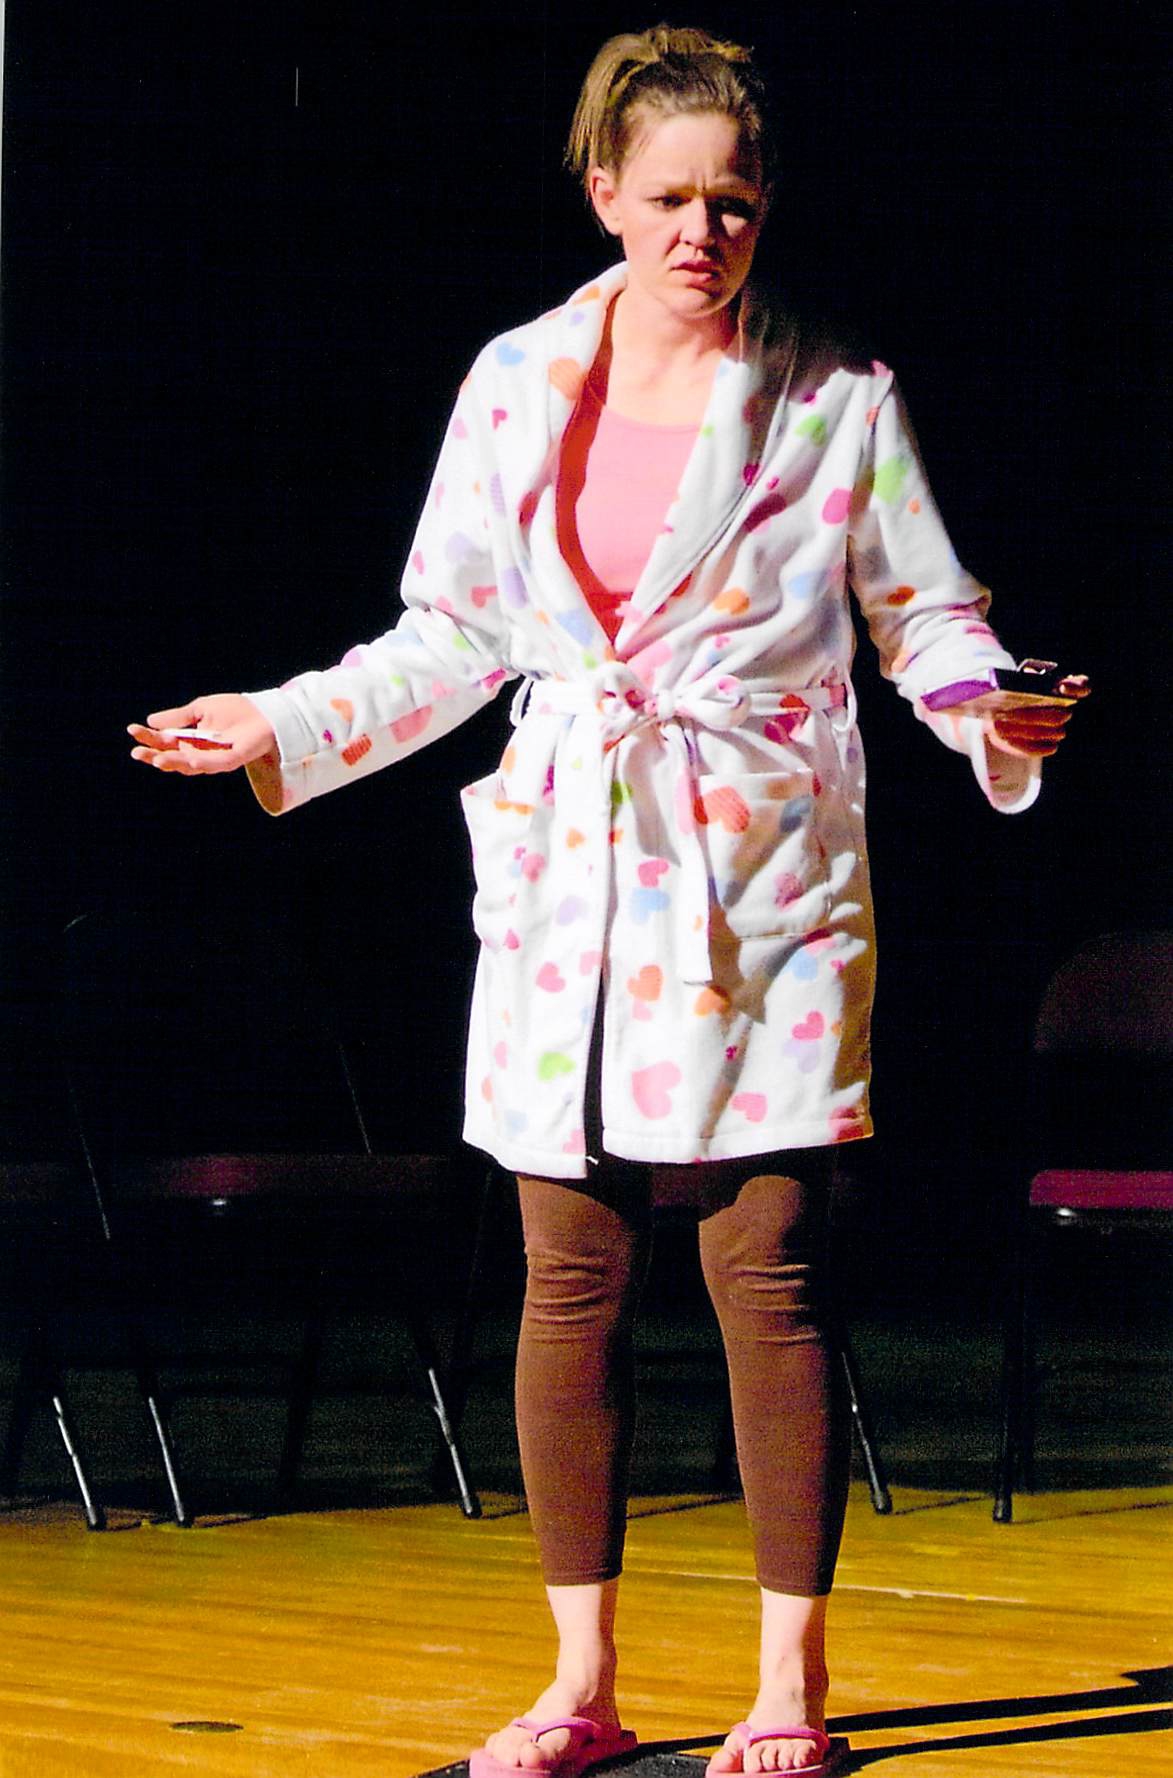 Woman on stage in Bathrobe